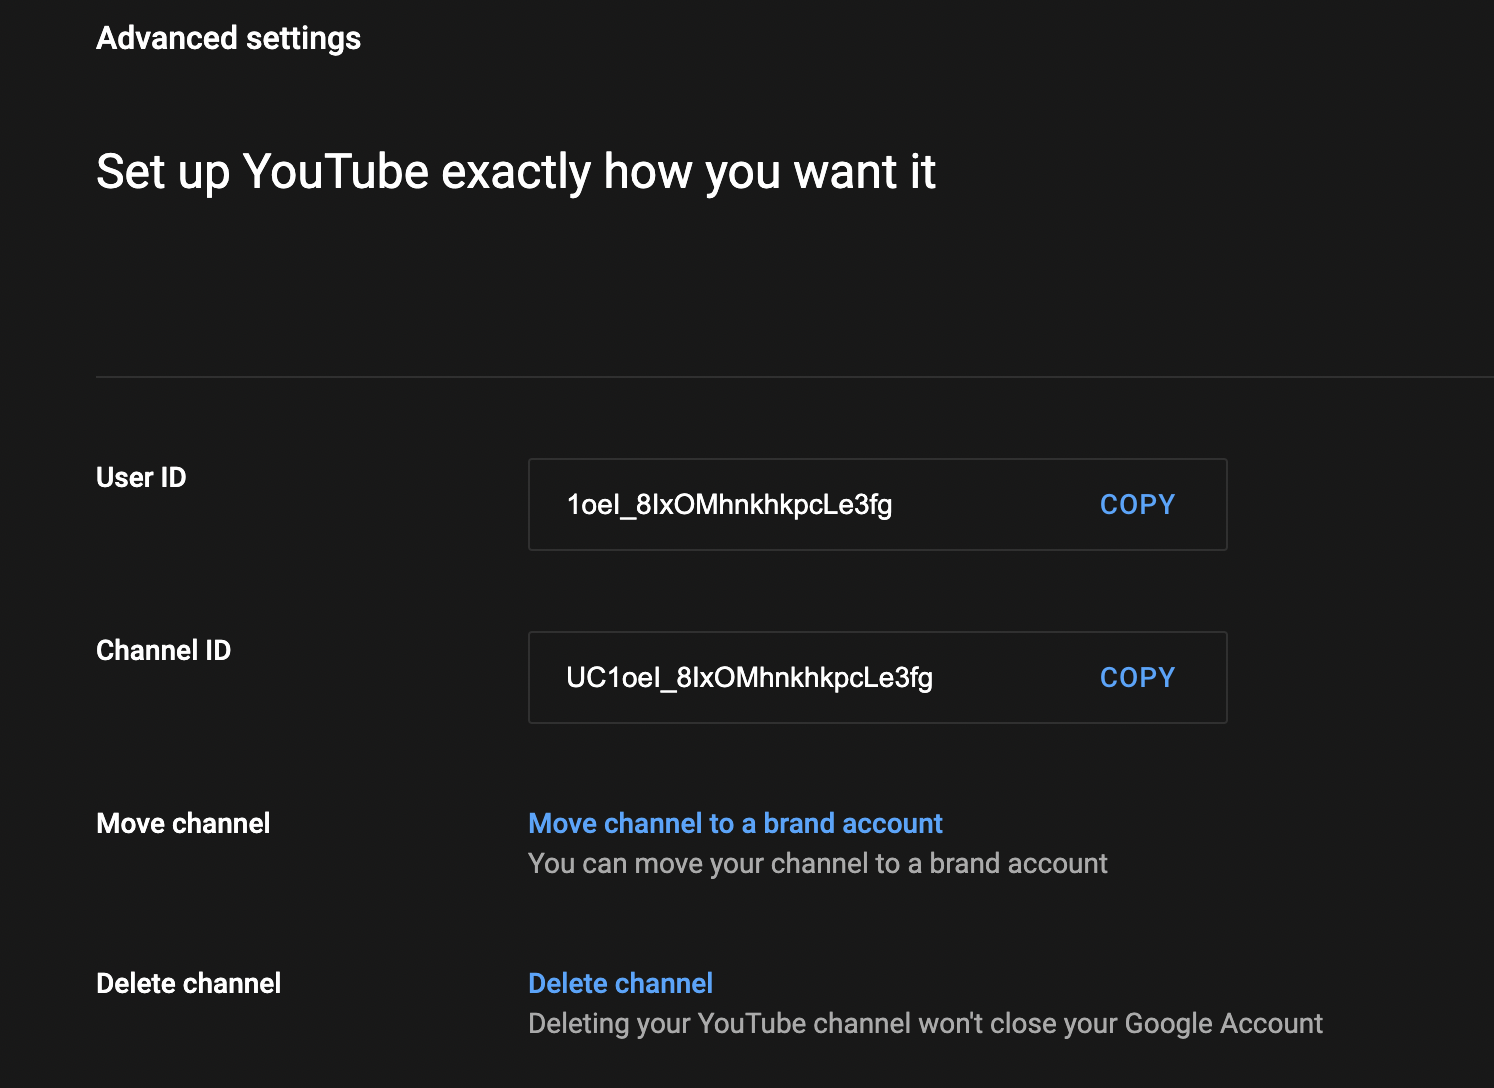 How to Delete a YouTube Channel - step 4: select delete